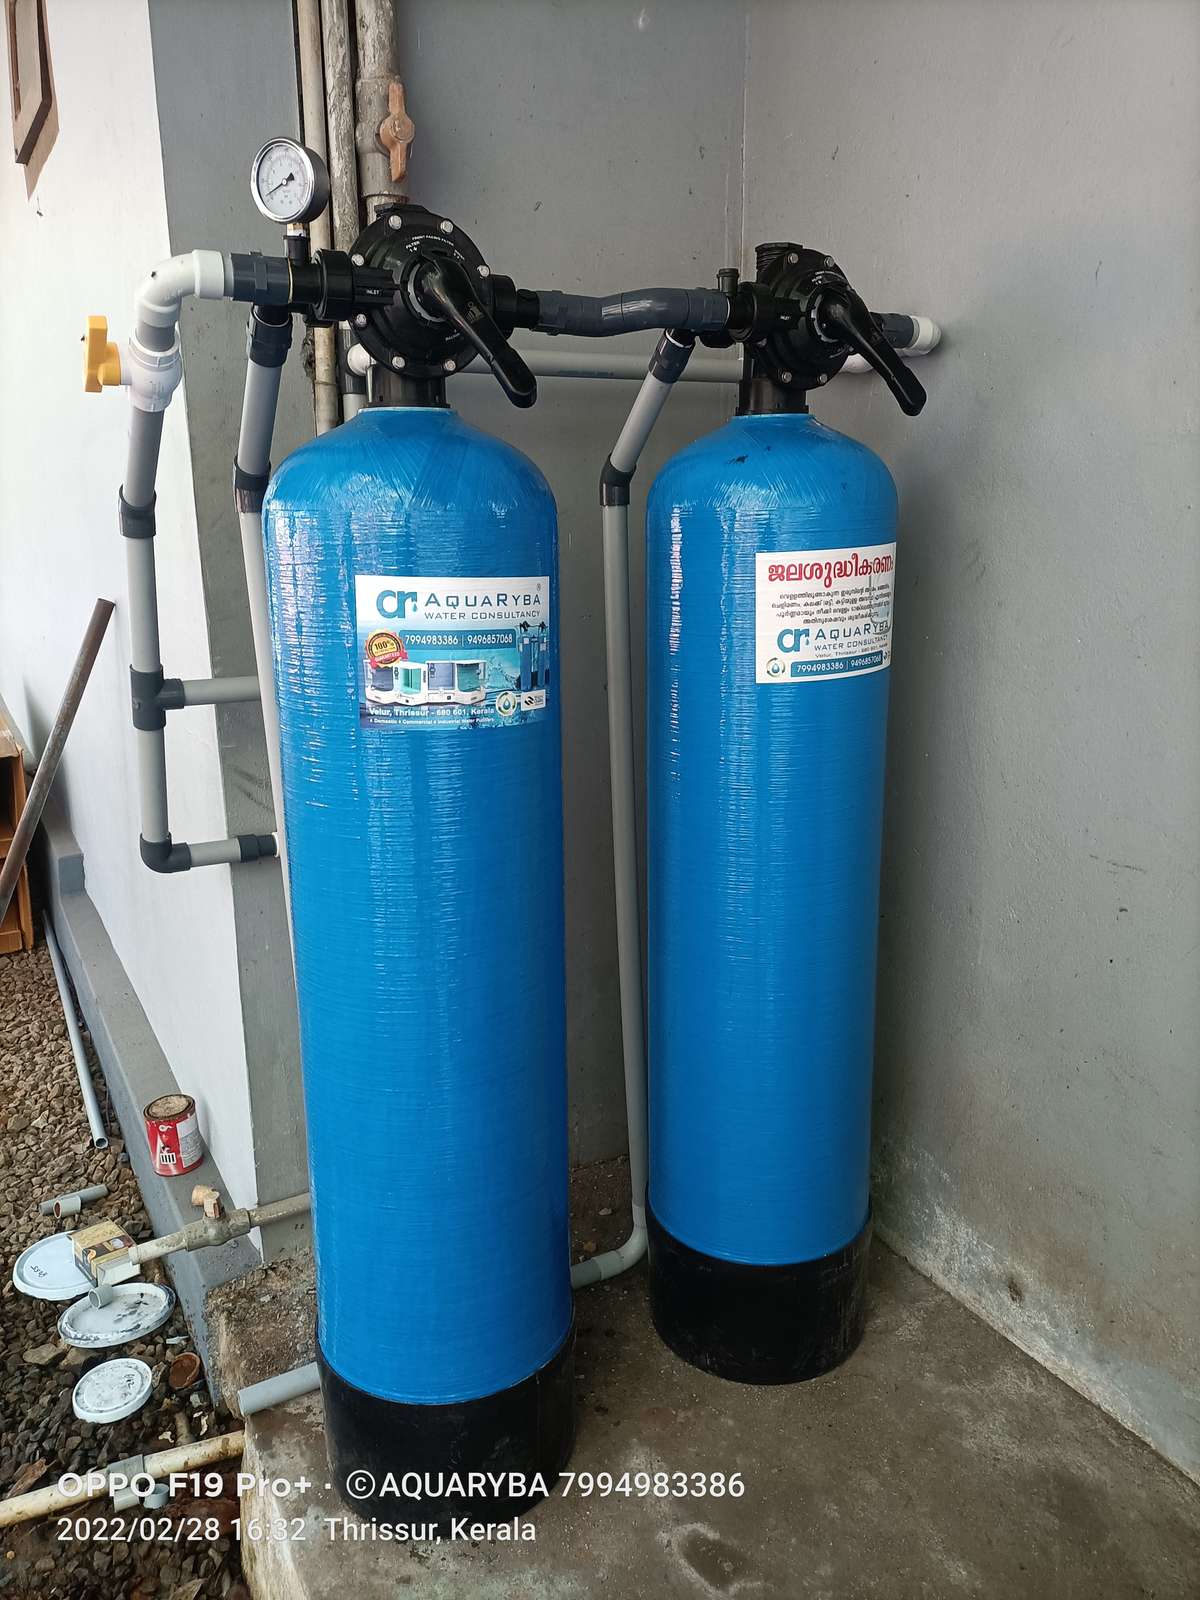 Designs by Service Provider Aquaryba water purification, Thrissur | Kolo